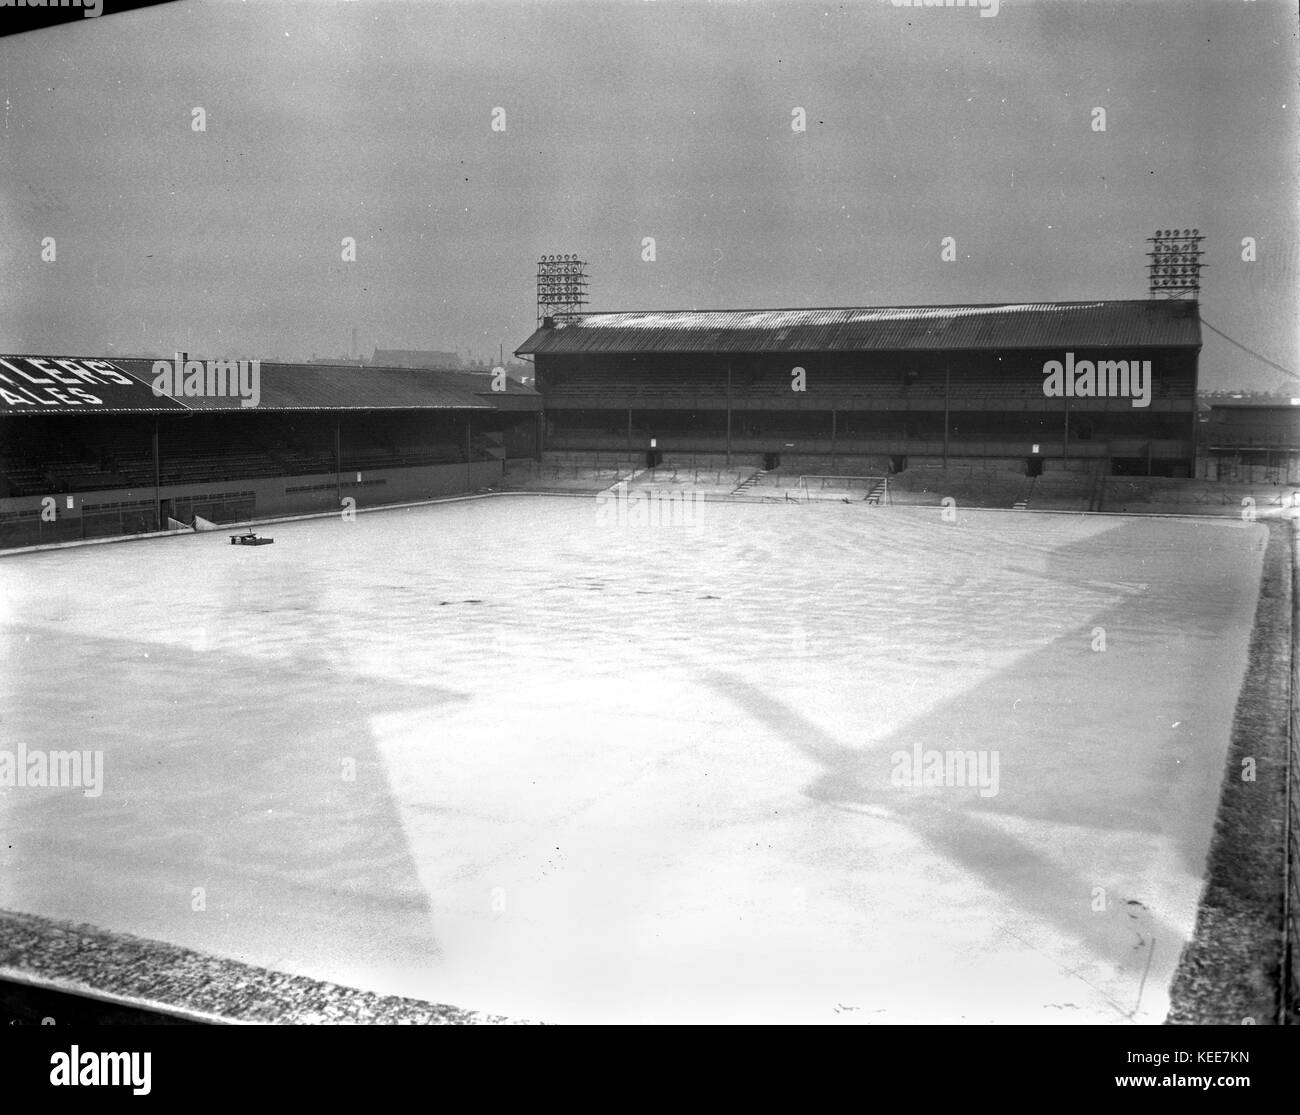 Derby County Football Club stadium from 1895 to 1997 - The Baseball Ground - under snow on 22 January 1963.    Photograph by Tony Henshaw  *** Local Caption *** From the wholly-owned original negative. Stock Photo